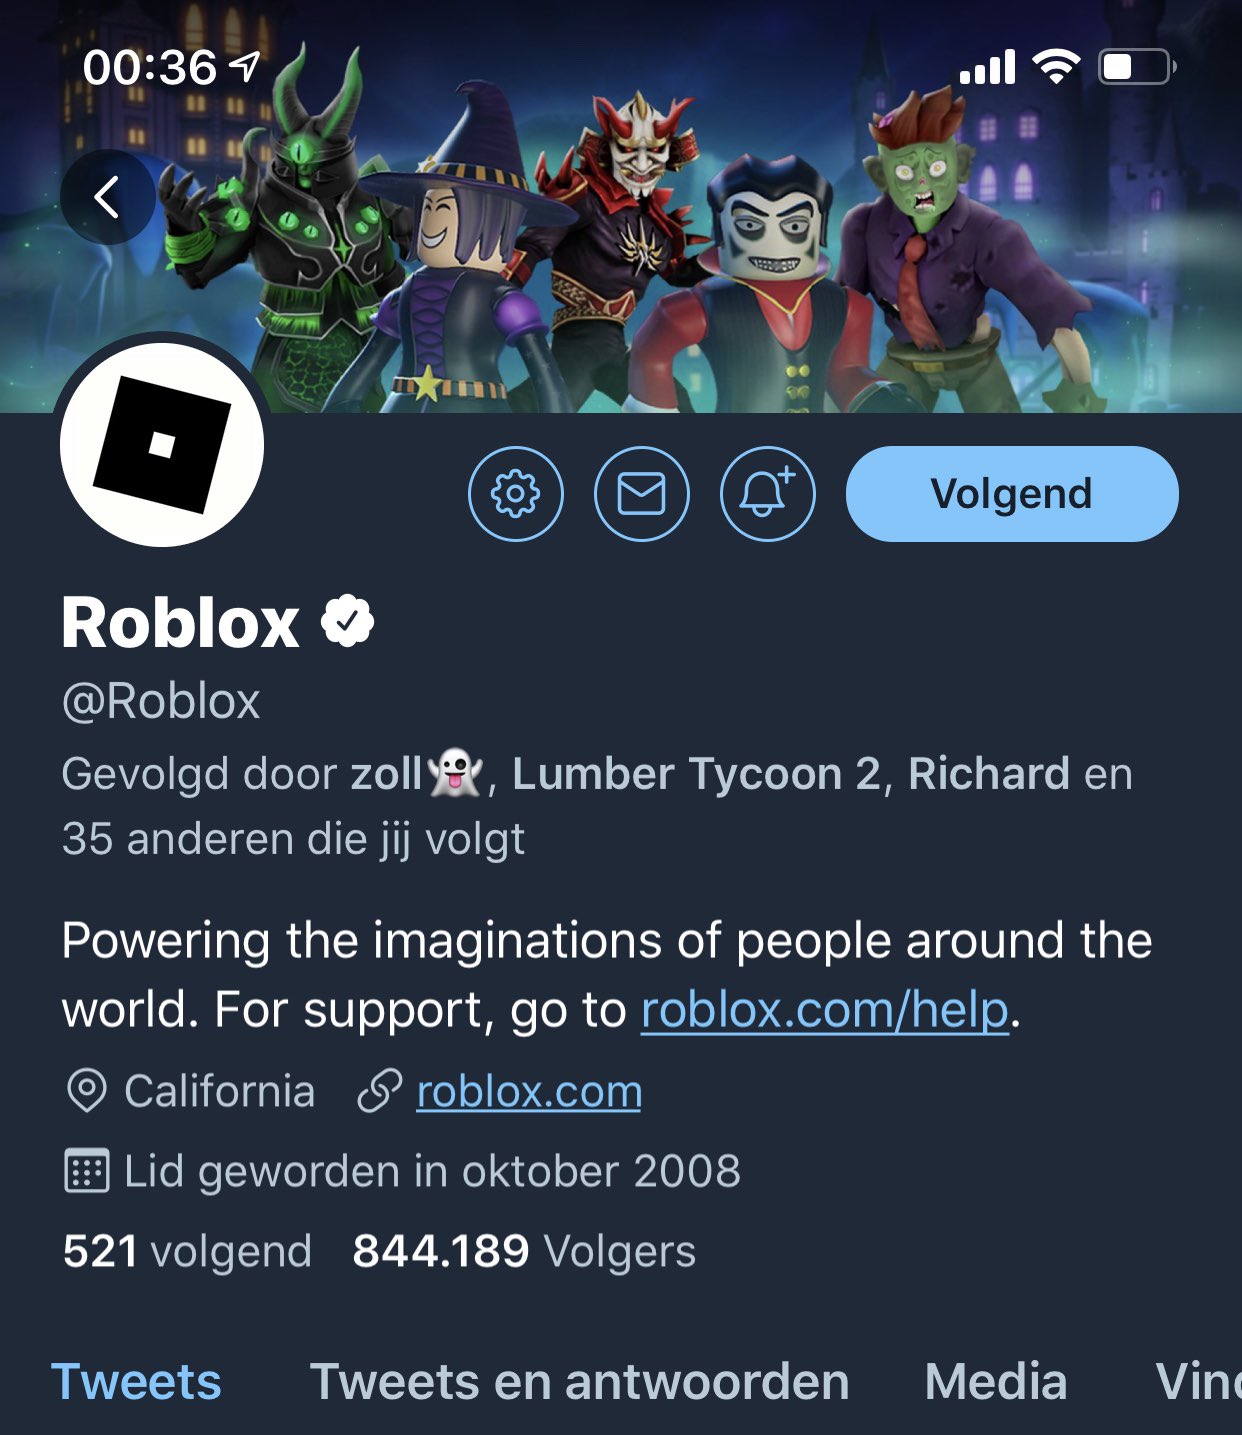 Tom On Twitter Yo Roblox Tell Us The Truth Have You Guys Stolen Bethesda S Logo Piracy Stolen Roblox Robloxdev Retweet Rblx Robloxgiveaway Robloxdev Robloxretweet Robloxsucks Again Error227 Stolenlogofound Inspiration Bethesda - blue umad roblox